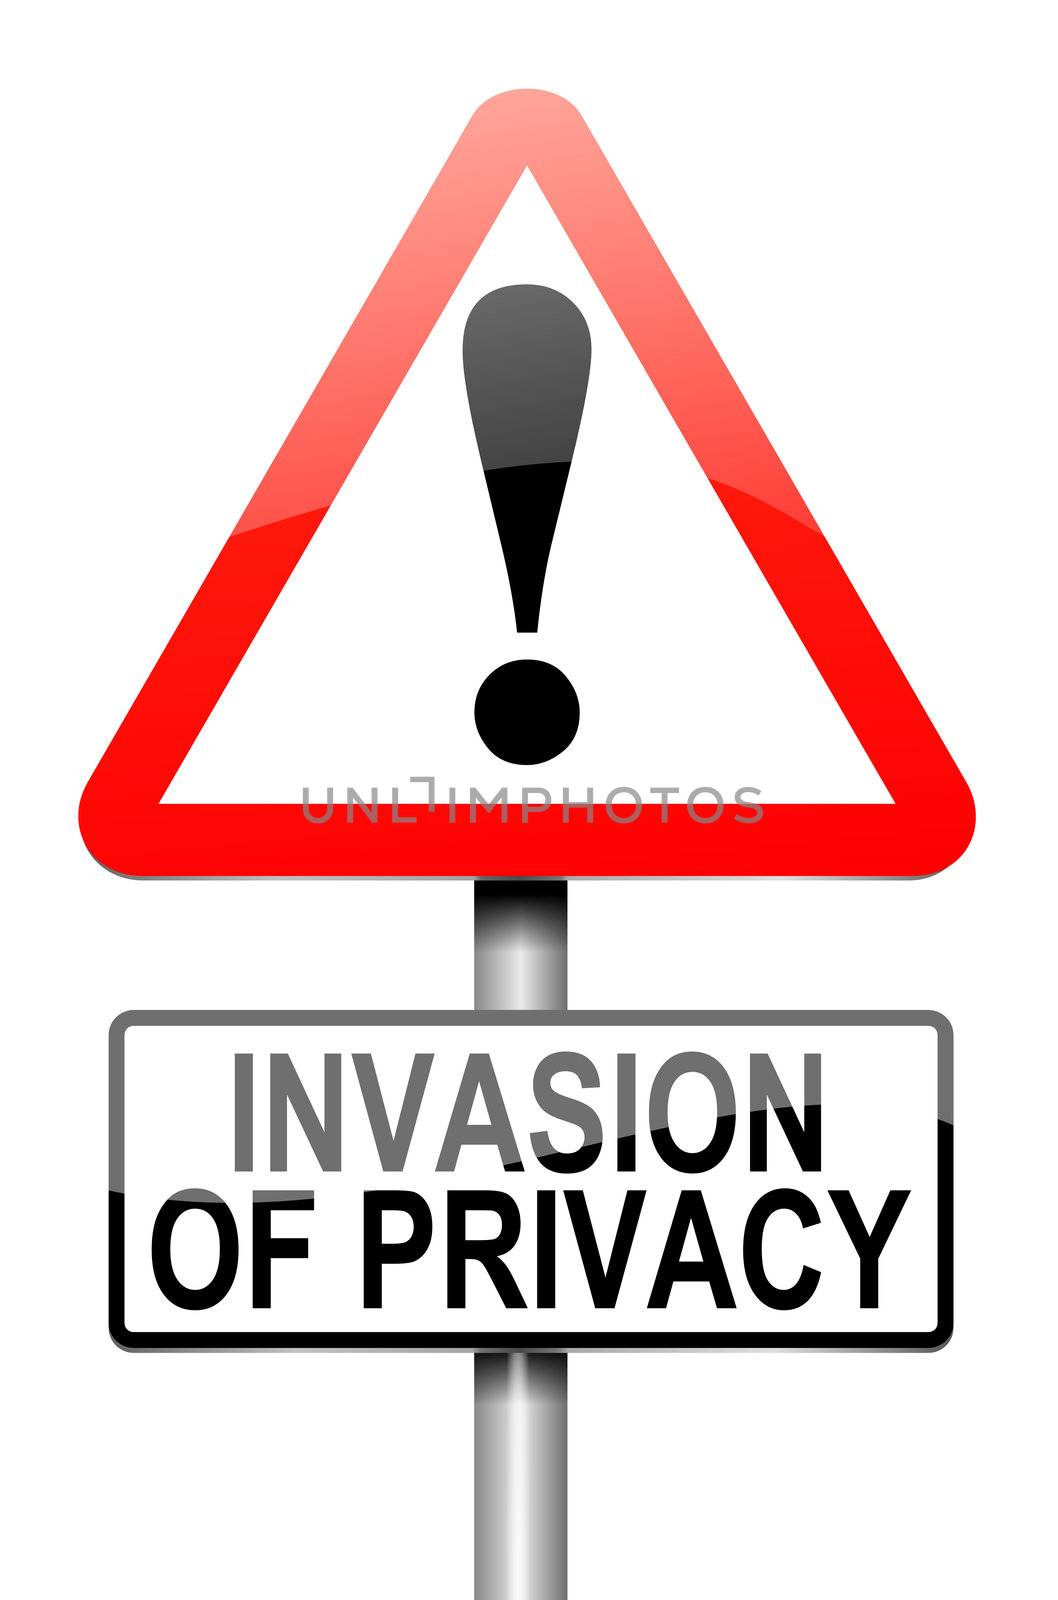 Invasion of privacy warning. by 72soul